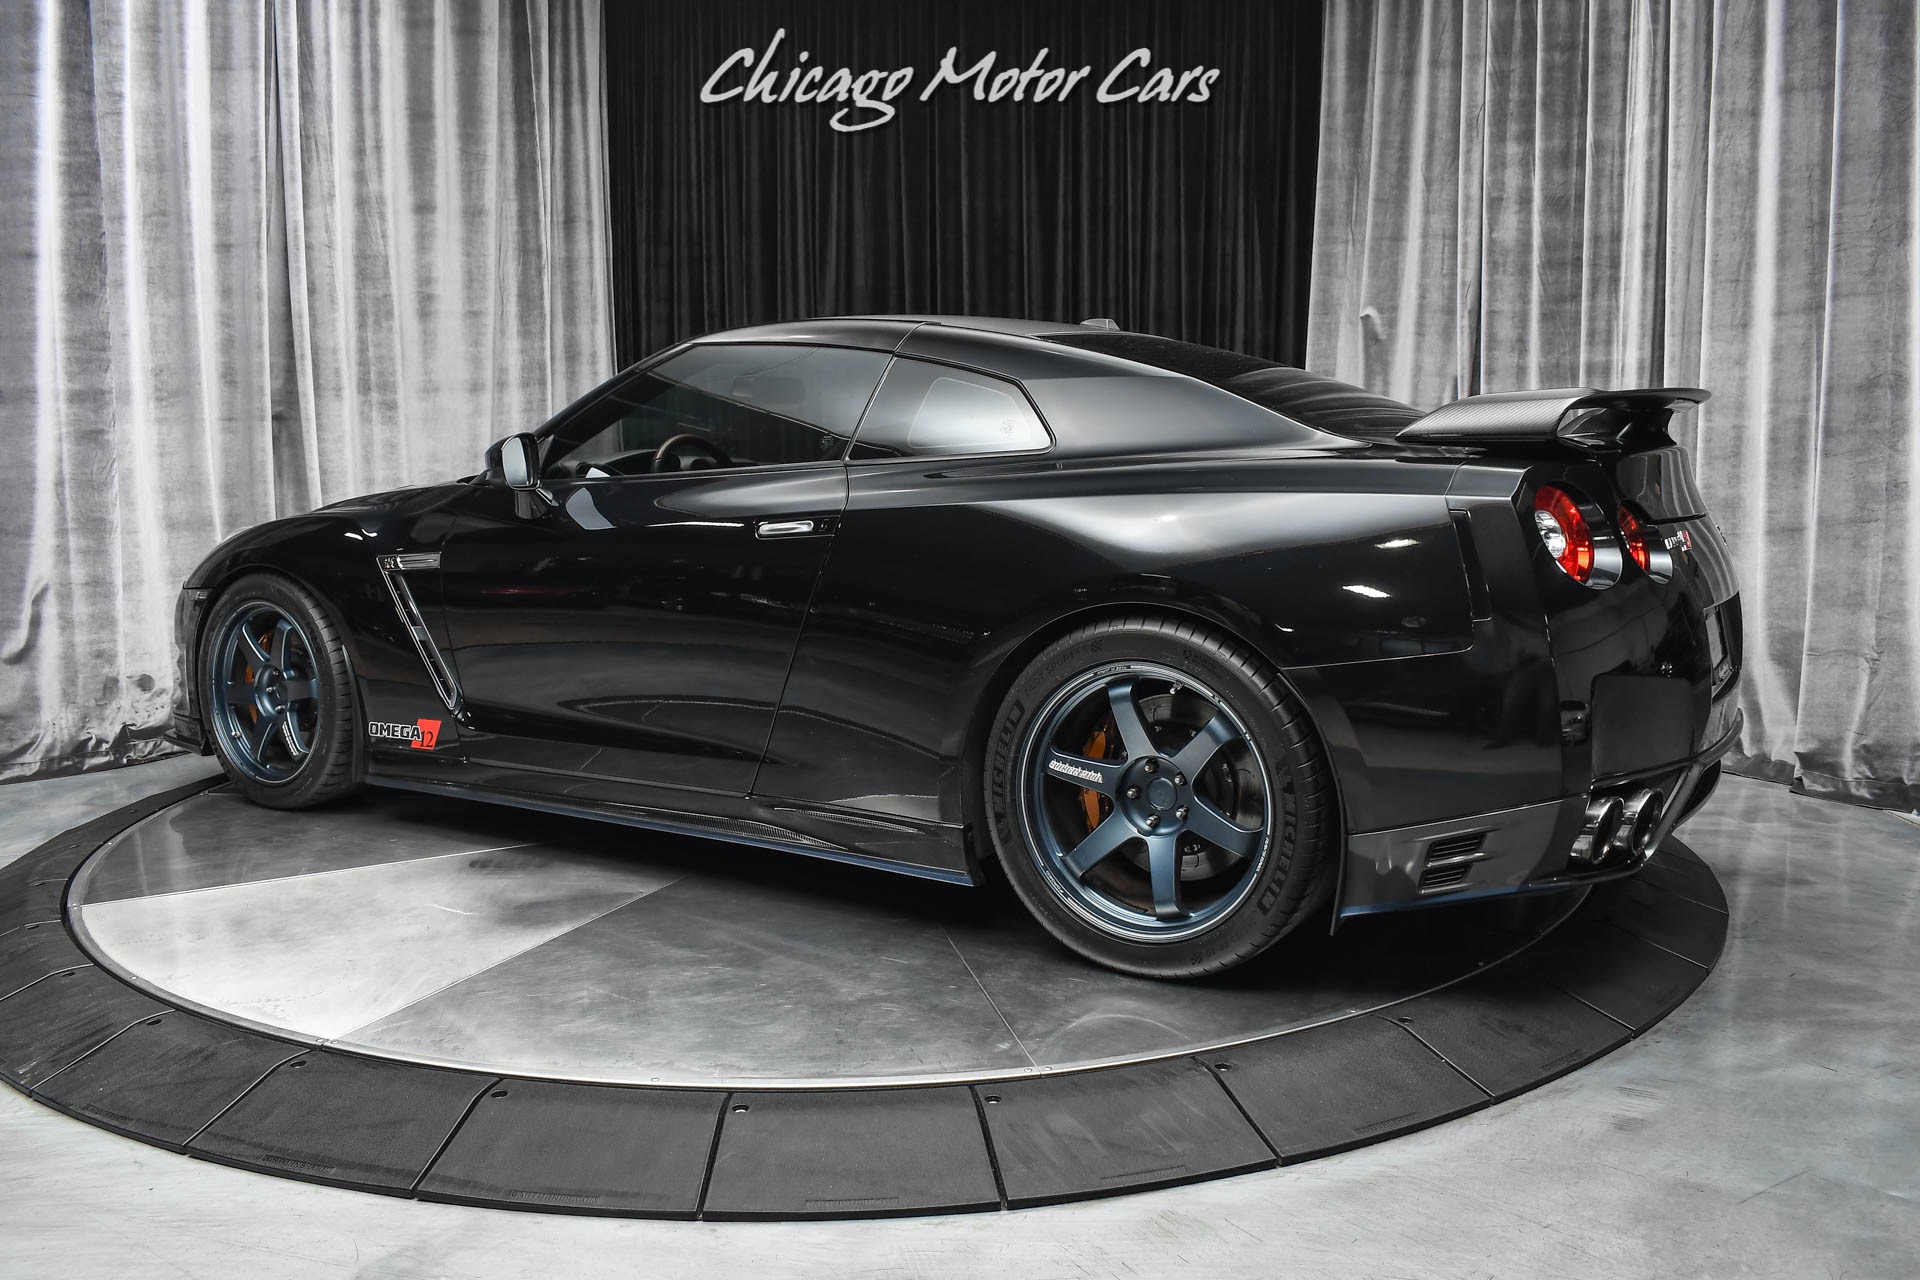 Used-2014-Nissan-GT-R-Premium-AMS-OMEGA-12-1150WHP-8-Second-14-Mile